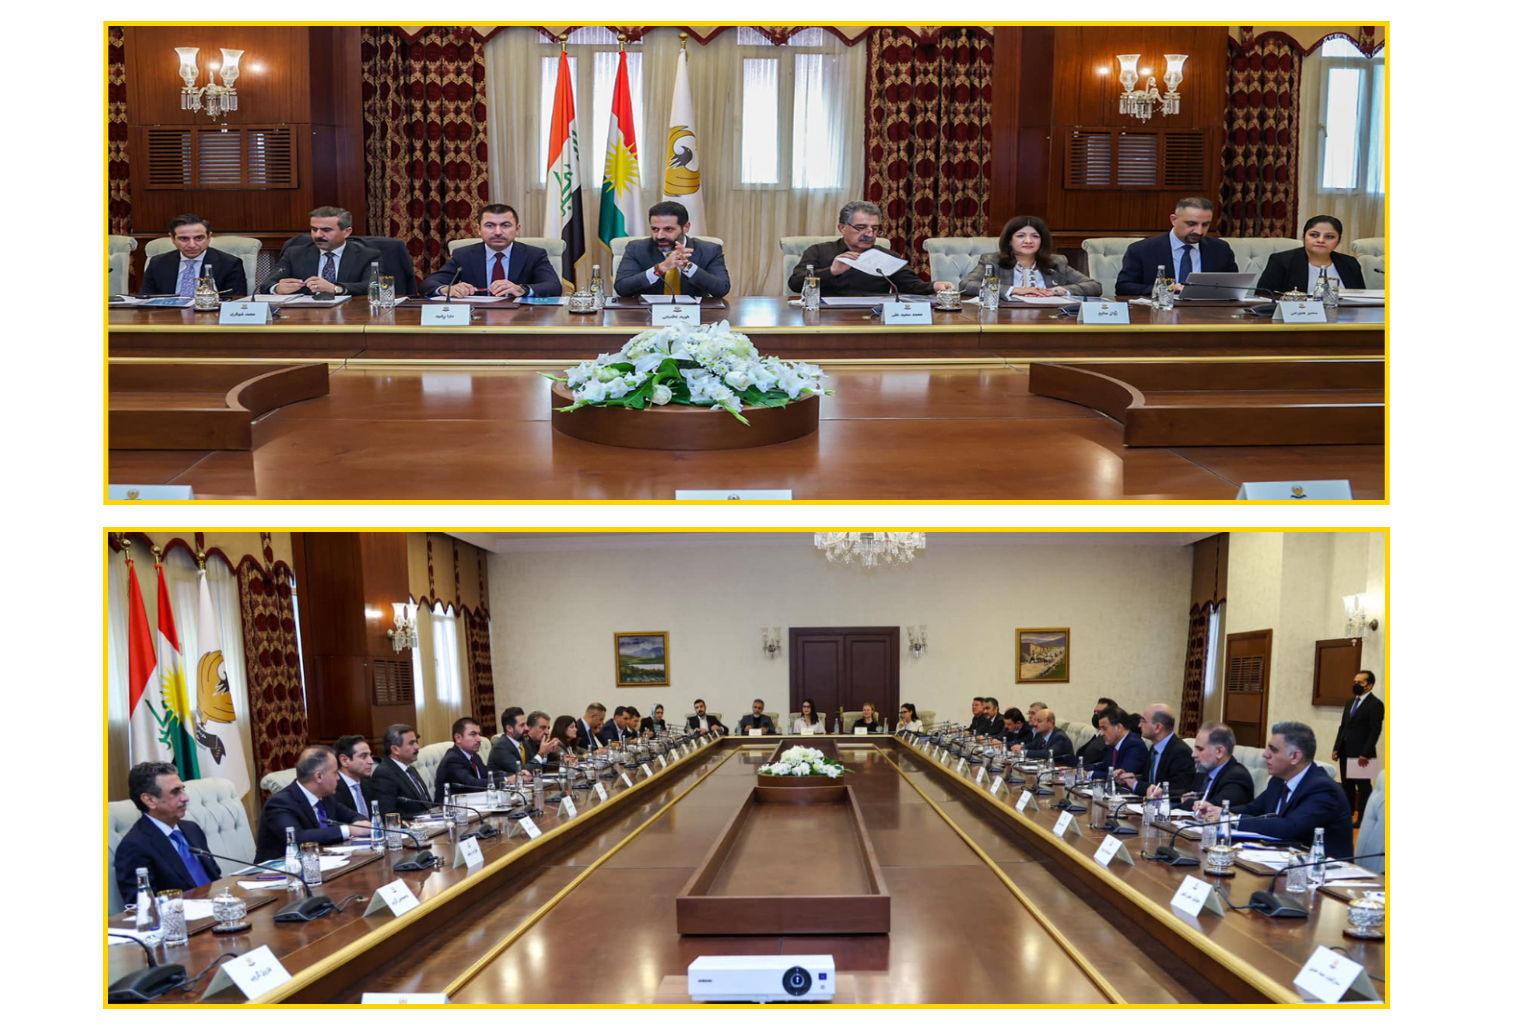 Vim Foundation attended a meeting held by the Kurdistan Regional Government (KRG) and relevant authorities